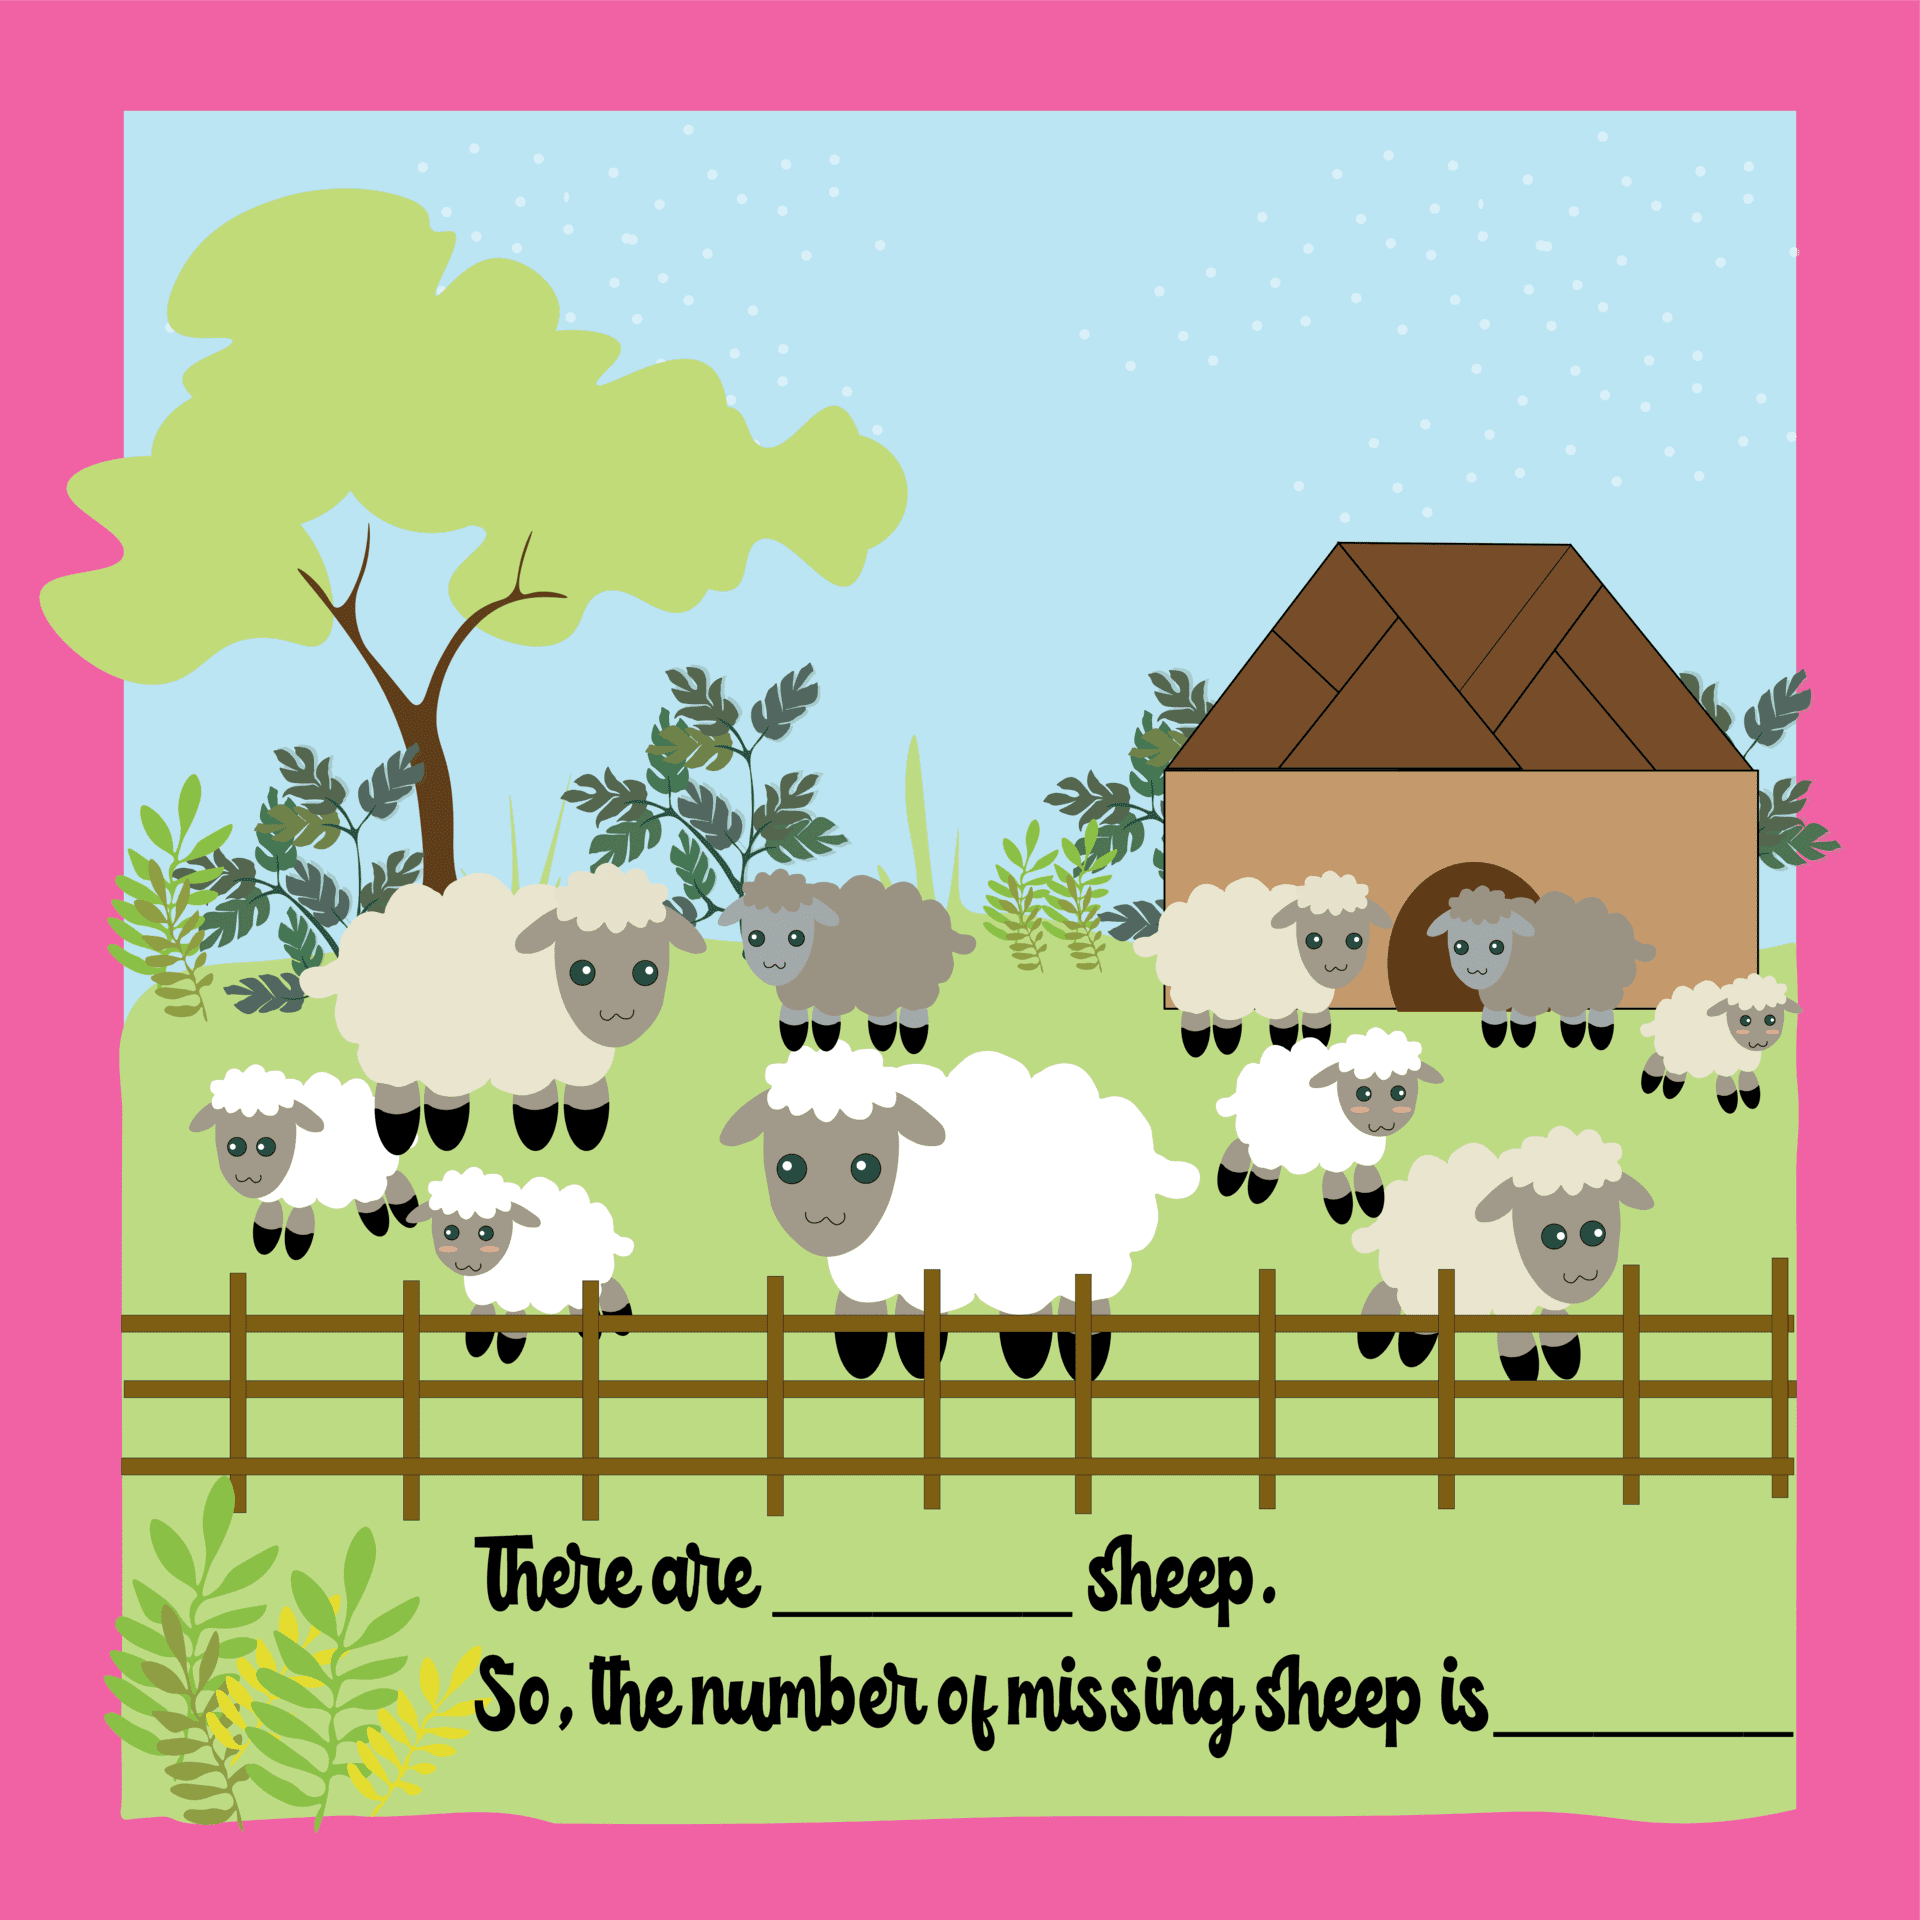 Finding the Number of Missing Sheep